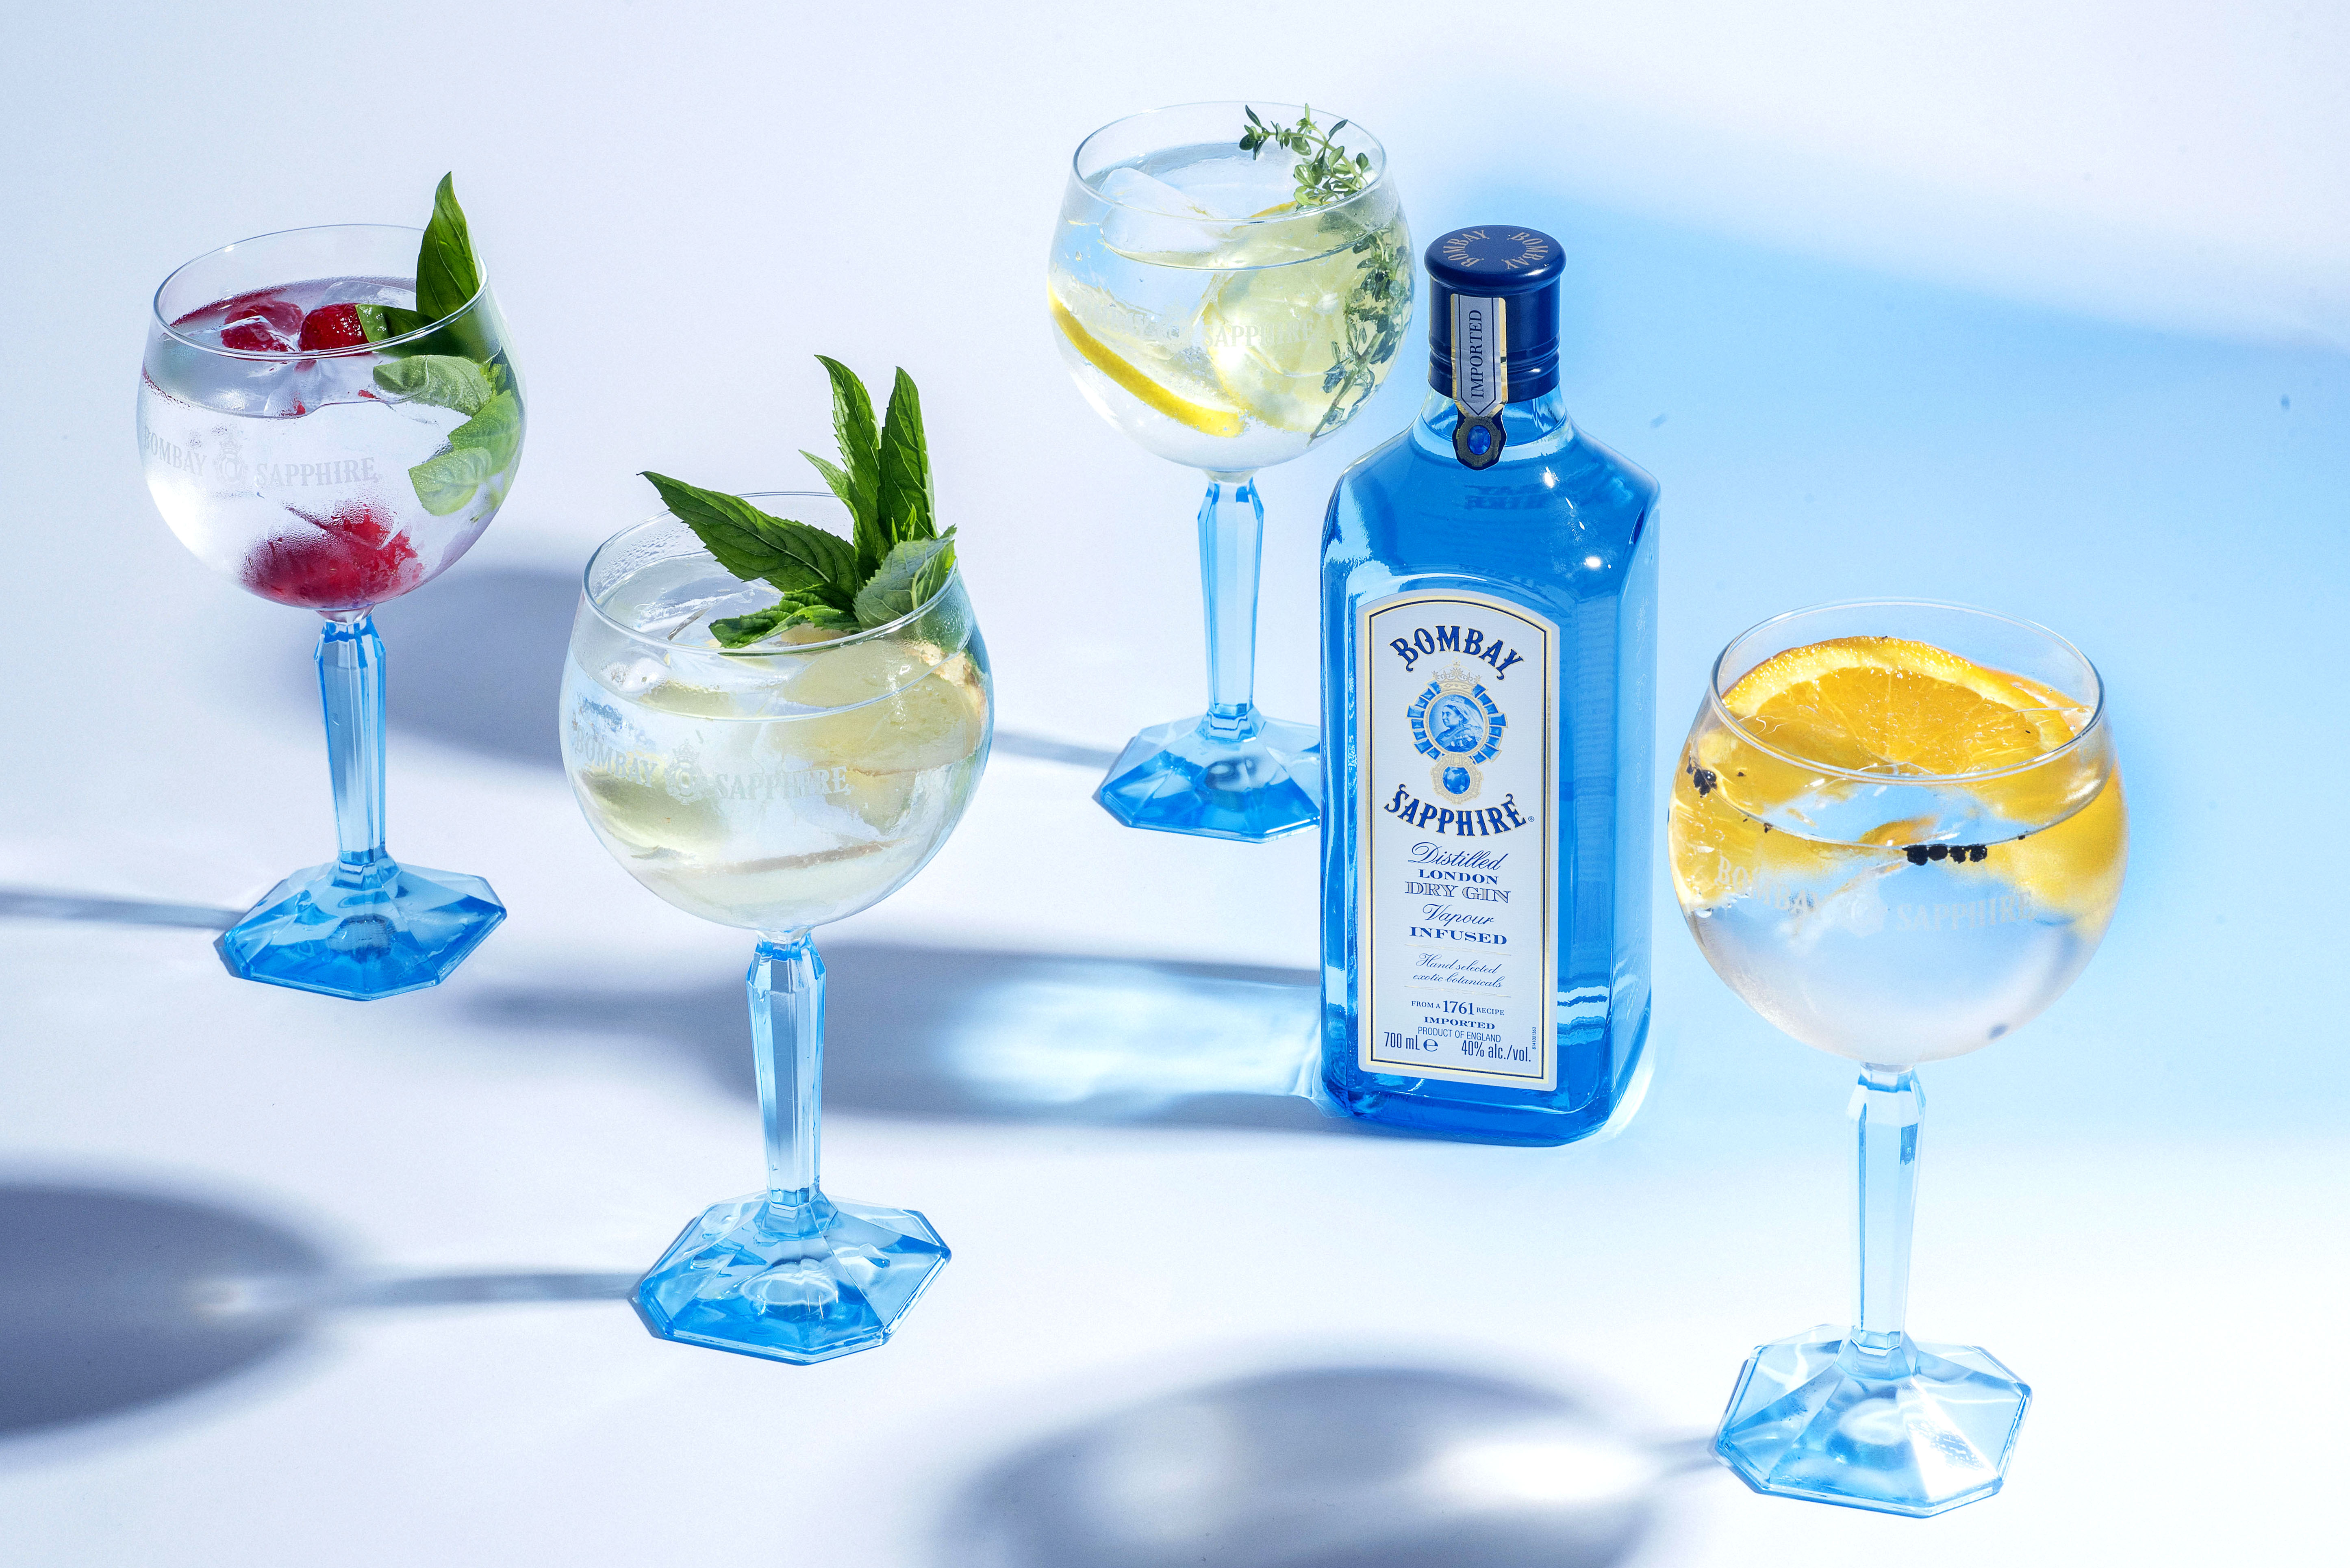 Bombay Sapphire has partnered with Australia’s oldest and most visited gallery